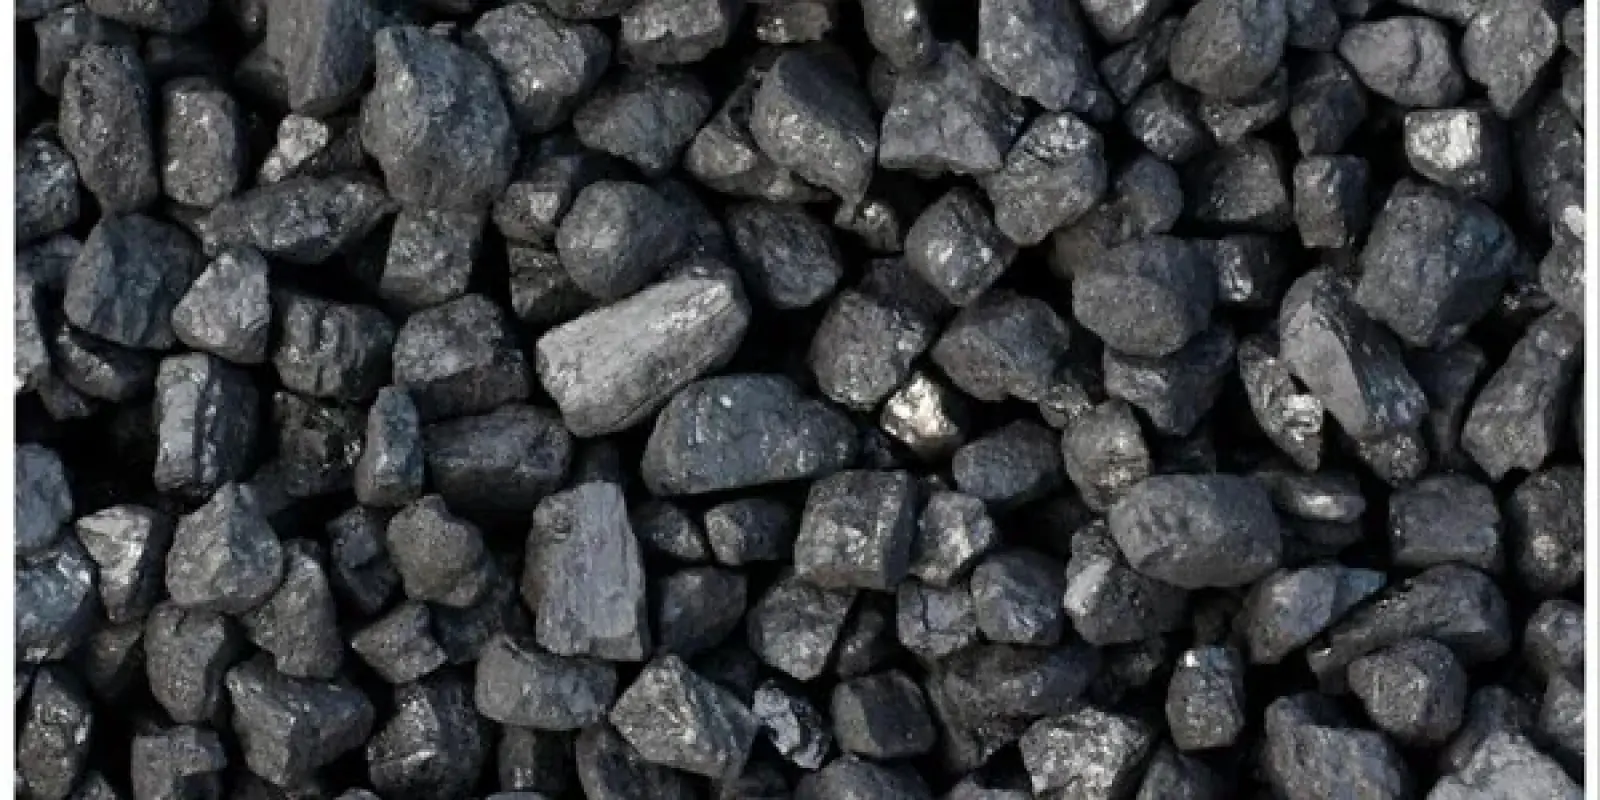 Coal import growth rate fell below 2.5% in the last decade, the ministry issued a statement giving information